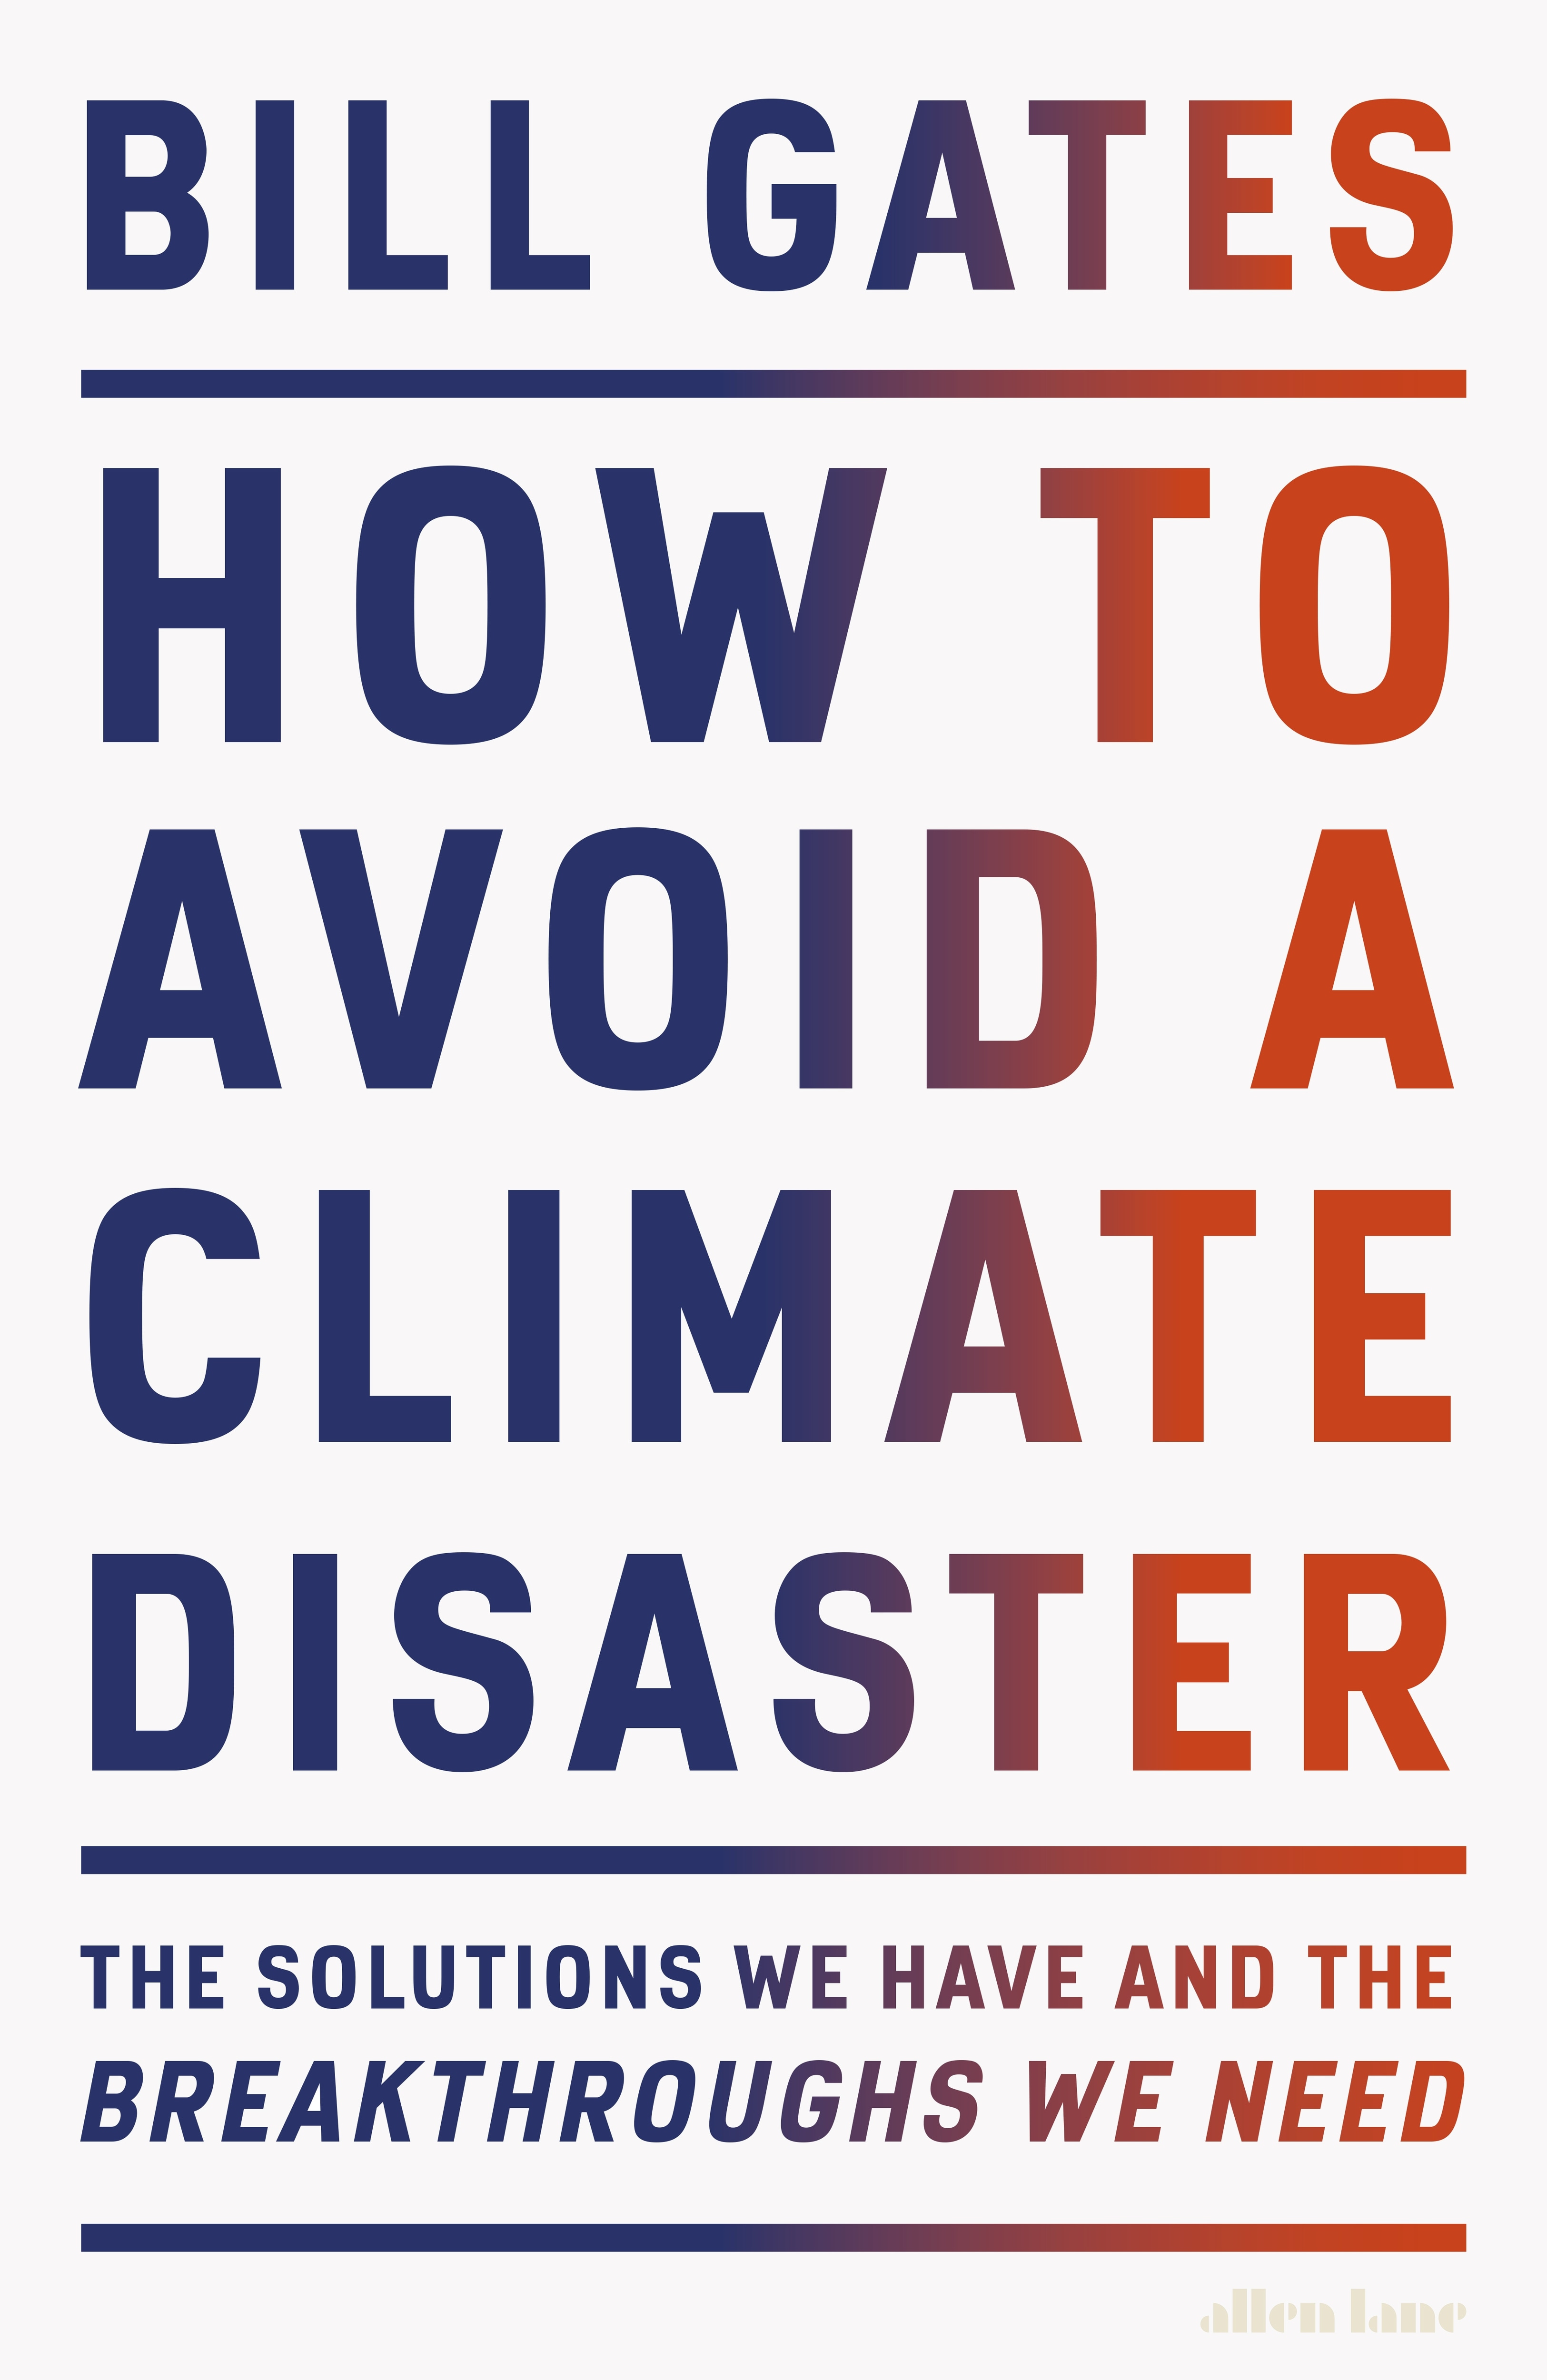 Book “How to Avoid a Climate Disaster” by Bill Gates — February 16, 2021